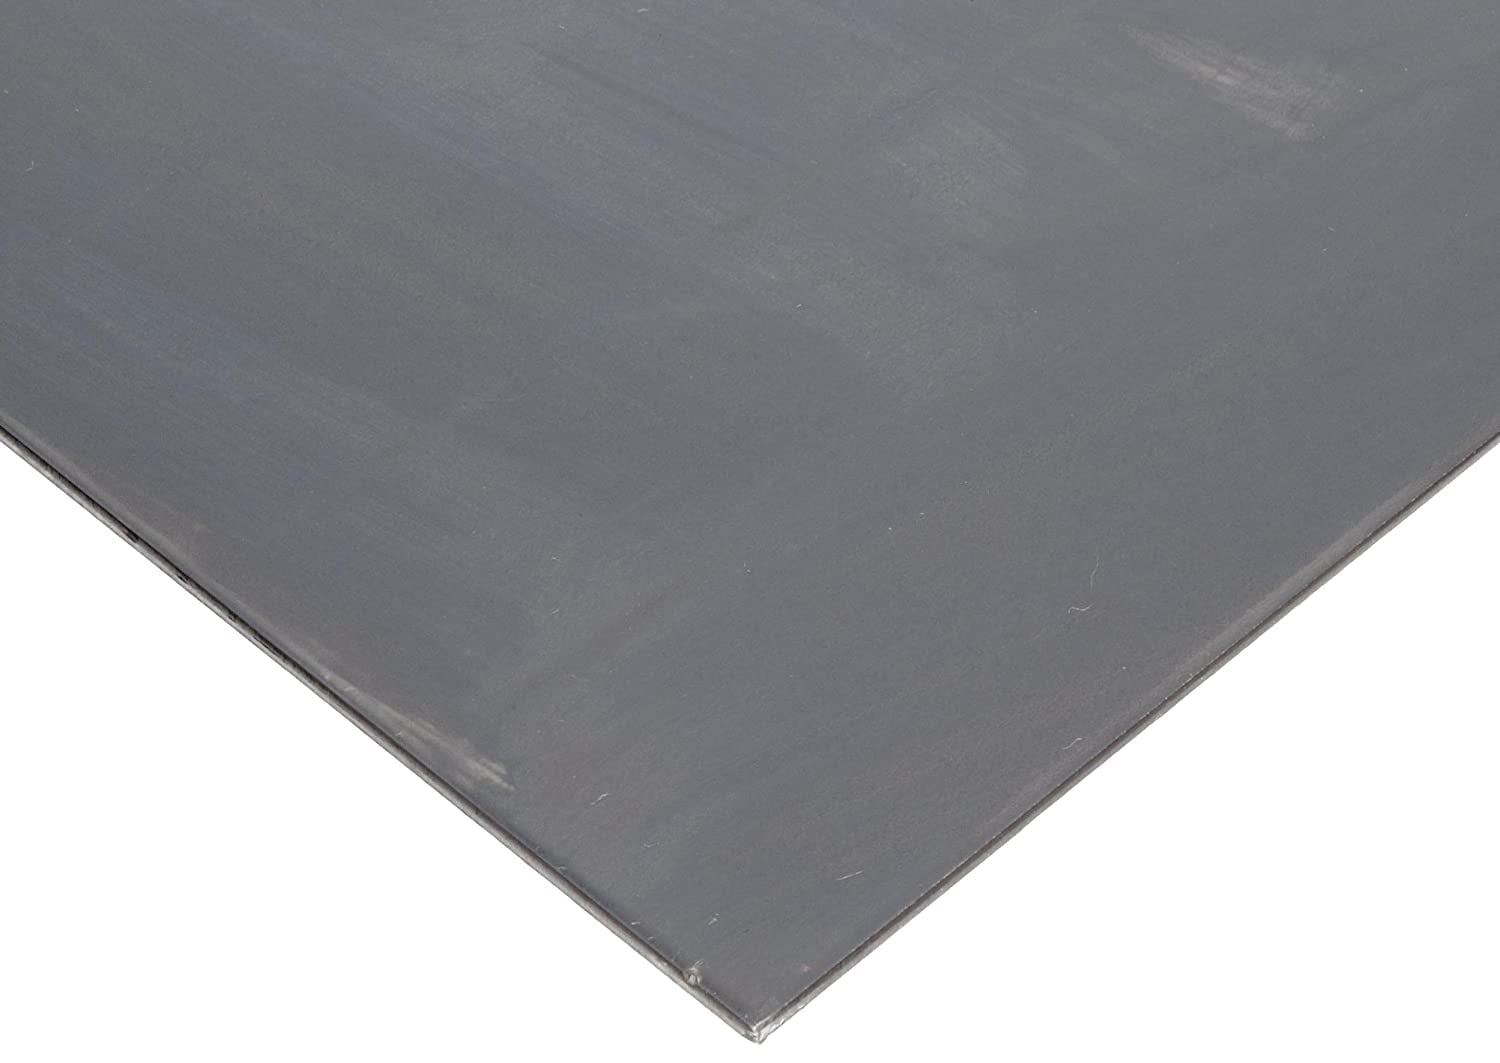 12 Gauge Finish A36 Steel Sheet 48 Length Unpolished ASTM A36 12 Width Mill 0.105 Thickness Hot Rolled 